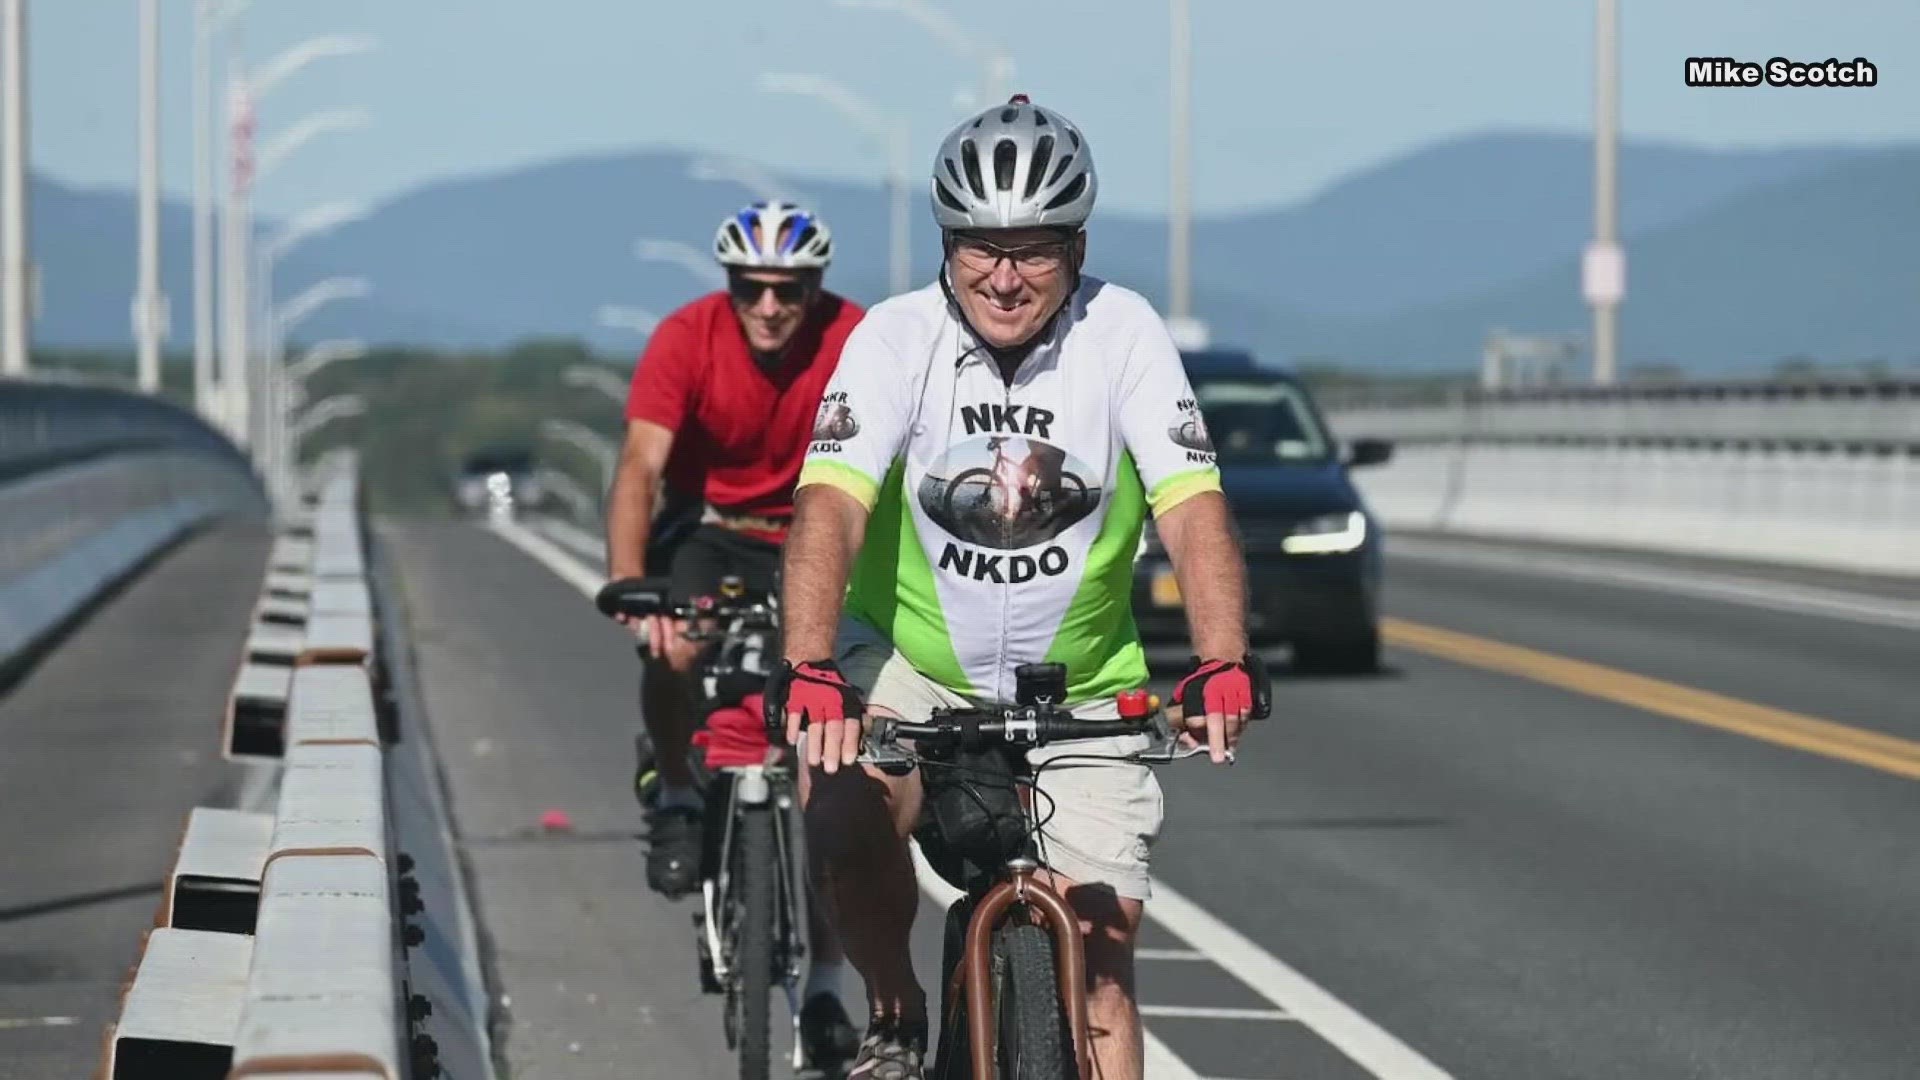 Mike Scotch travels around on his bike, taking the same routes that donated kidneys had to take on their way to a recipient.